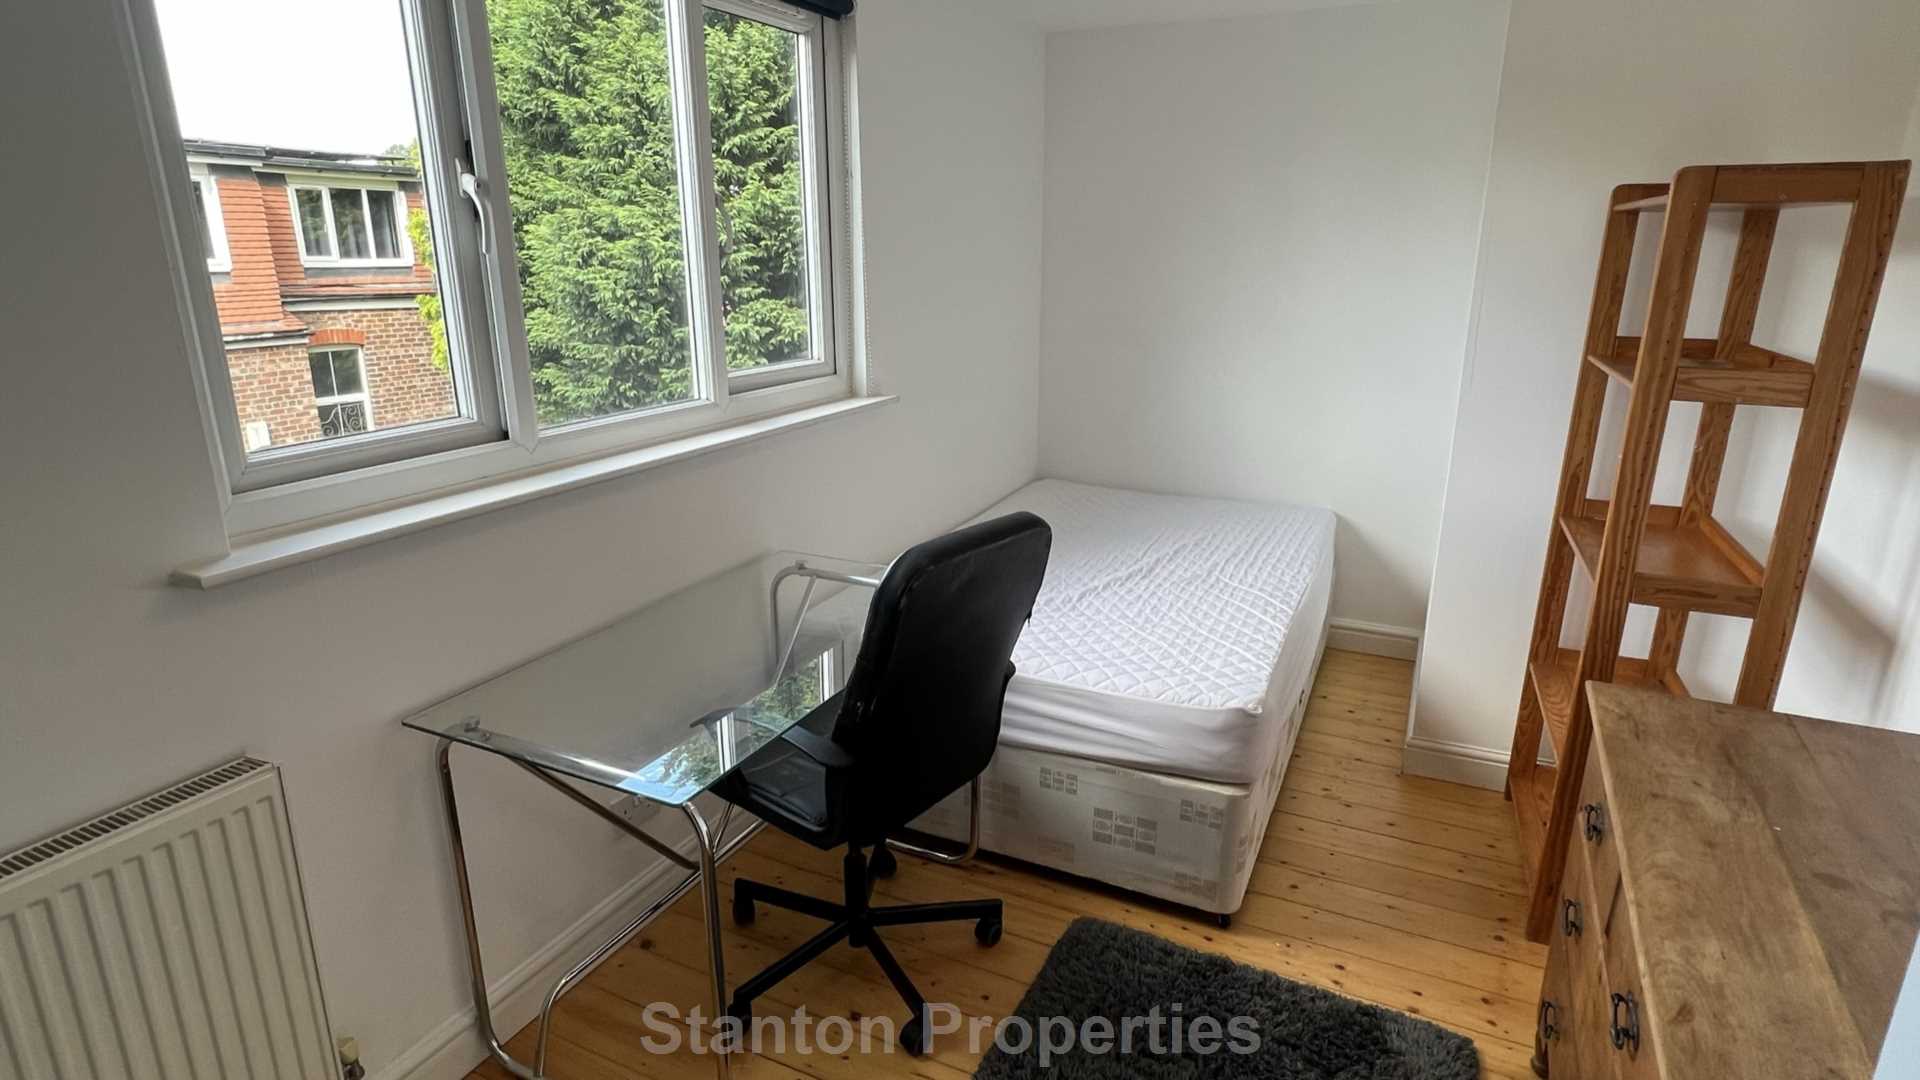 £145 pppw, Linden Grove, Fallowfield, Image 10